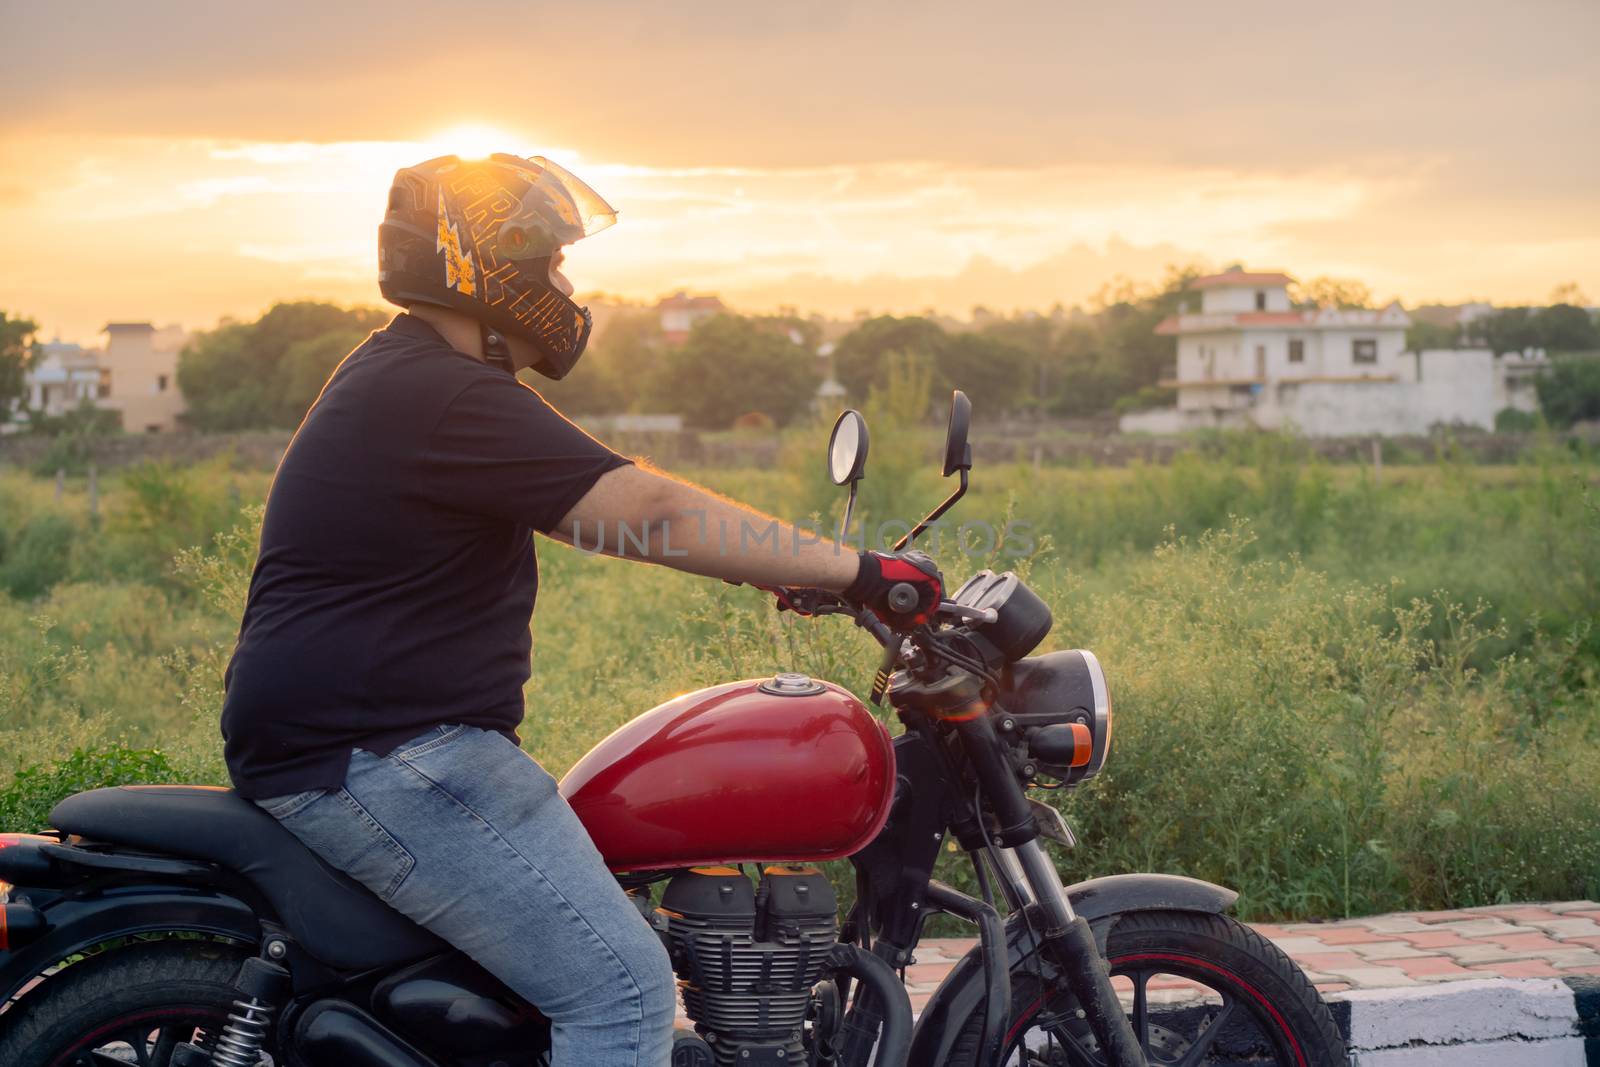 Young indian man with full face helmet and protective gloves riding a red royal enfield at sunset golden hour. Shows the culture of nomadism, travelling and adventure in the beautiful country of india with feilds in the background